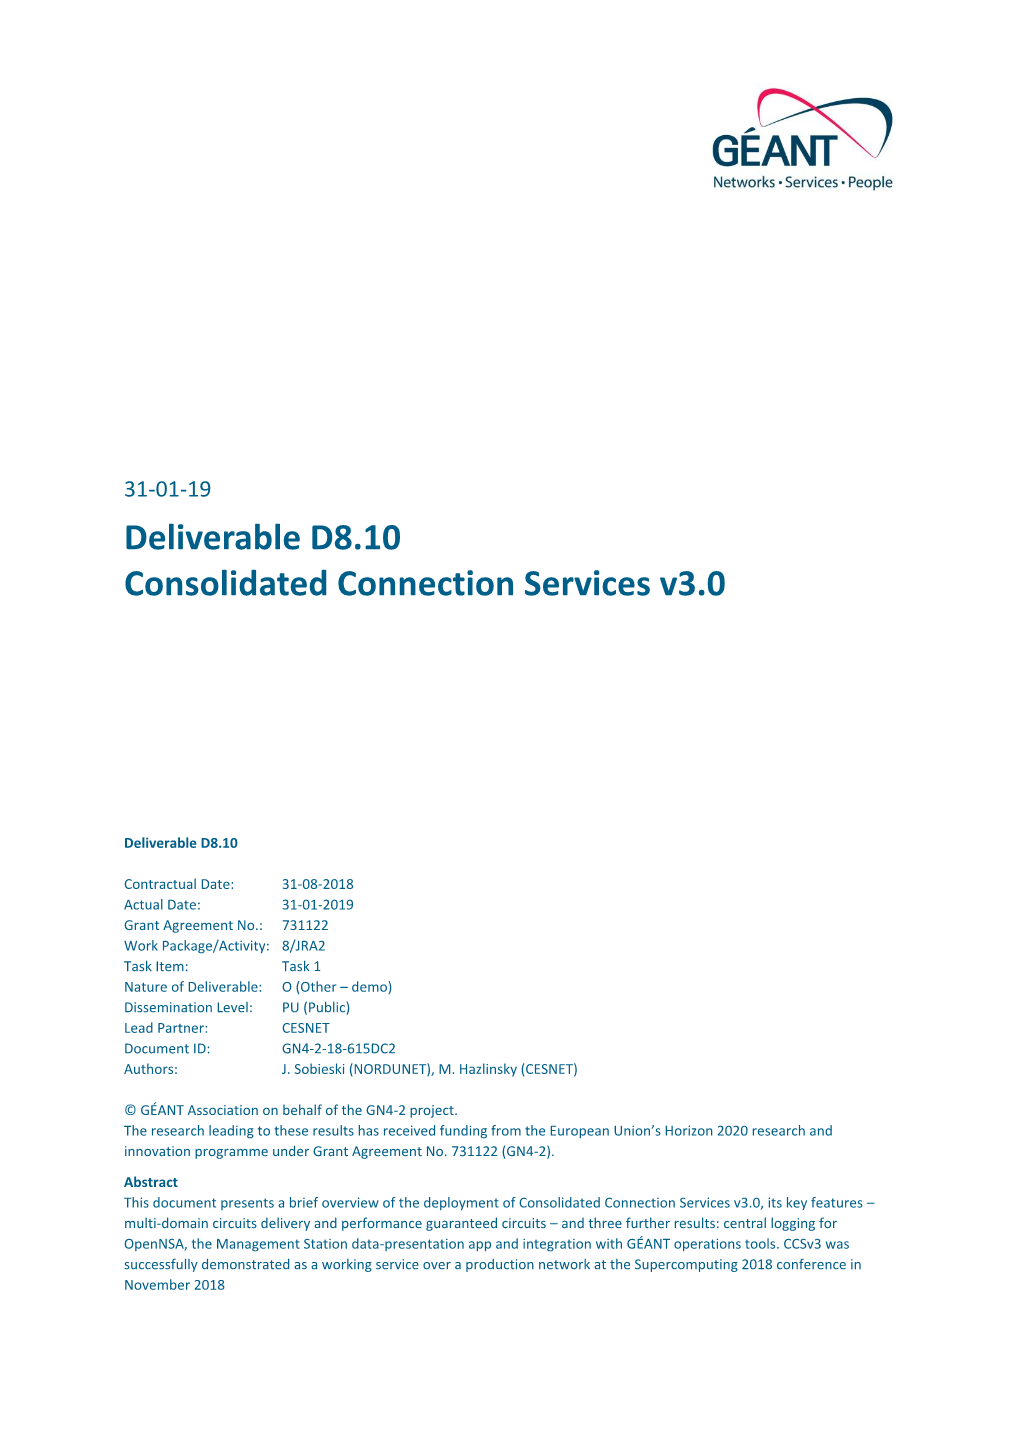 Deliverable D8.10 Consolidated Connection Services V3.0